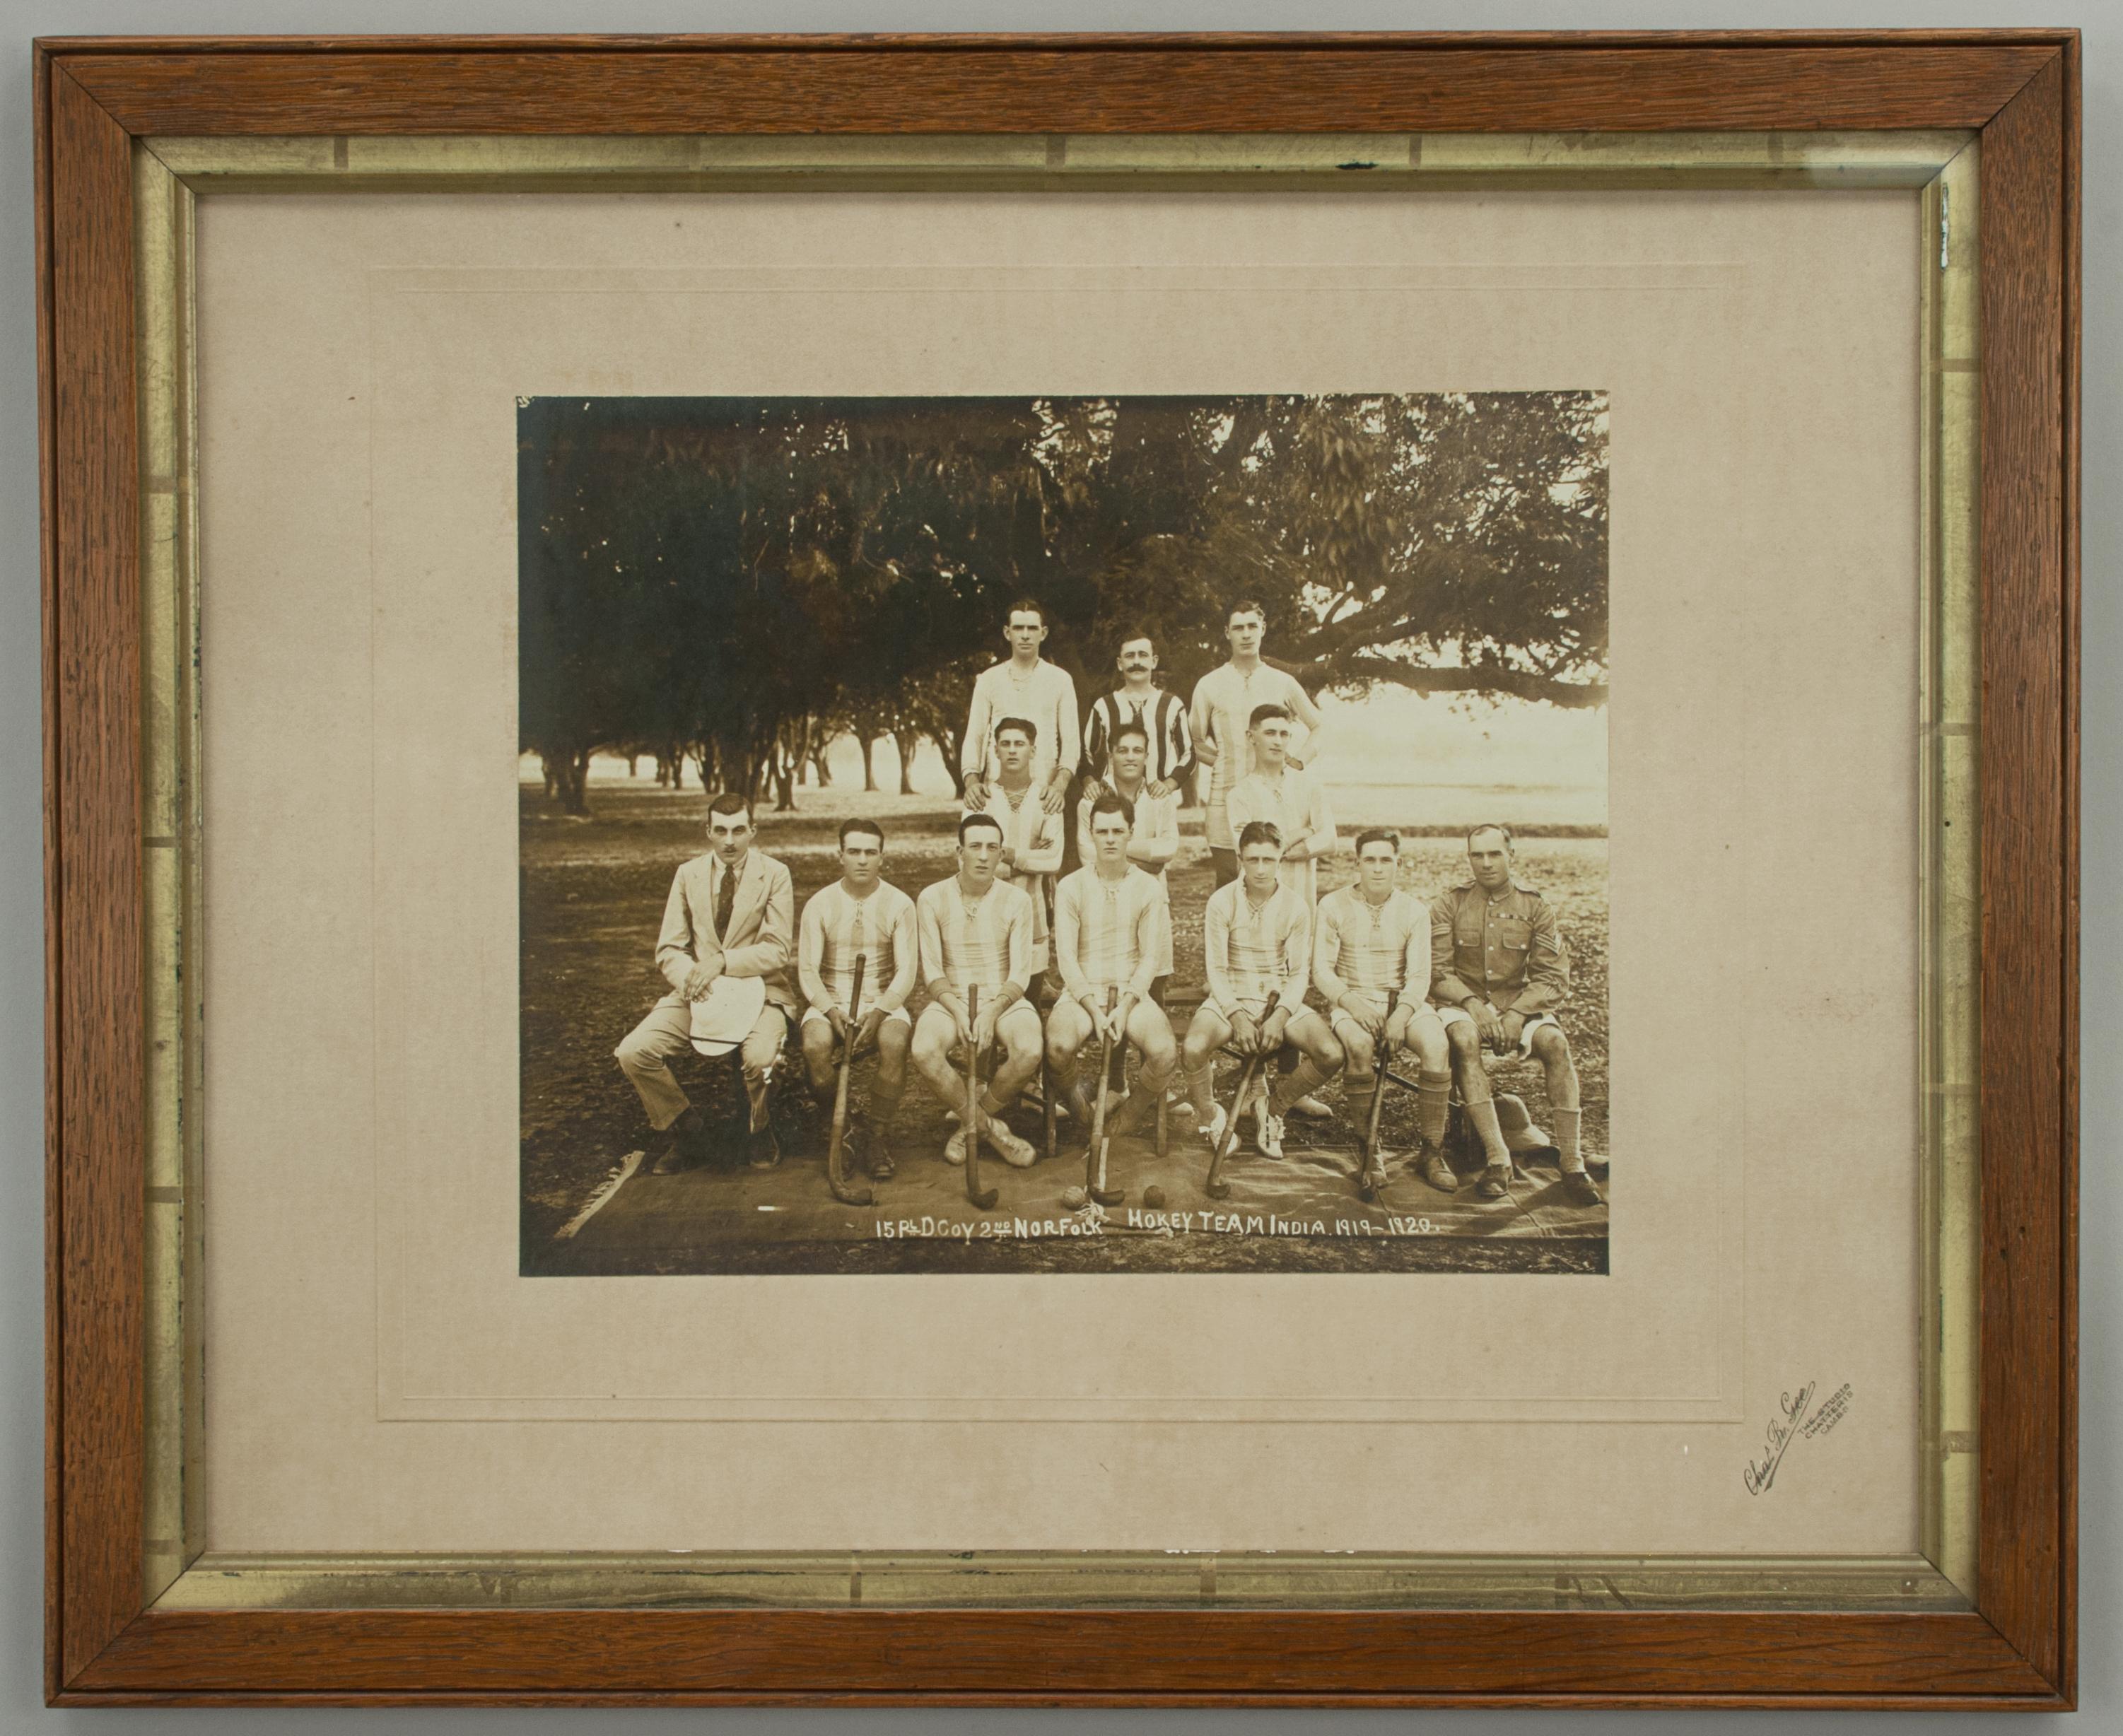 Team Photograph, Hockey Team.
A team photograph of a military hockey team in India, 1919 - 1920. The sepia team photo is mounted on the official Cambridge photographers mount 'Charles B. Gee, The Studio, Chatteris, Cambridge'. Across the